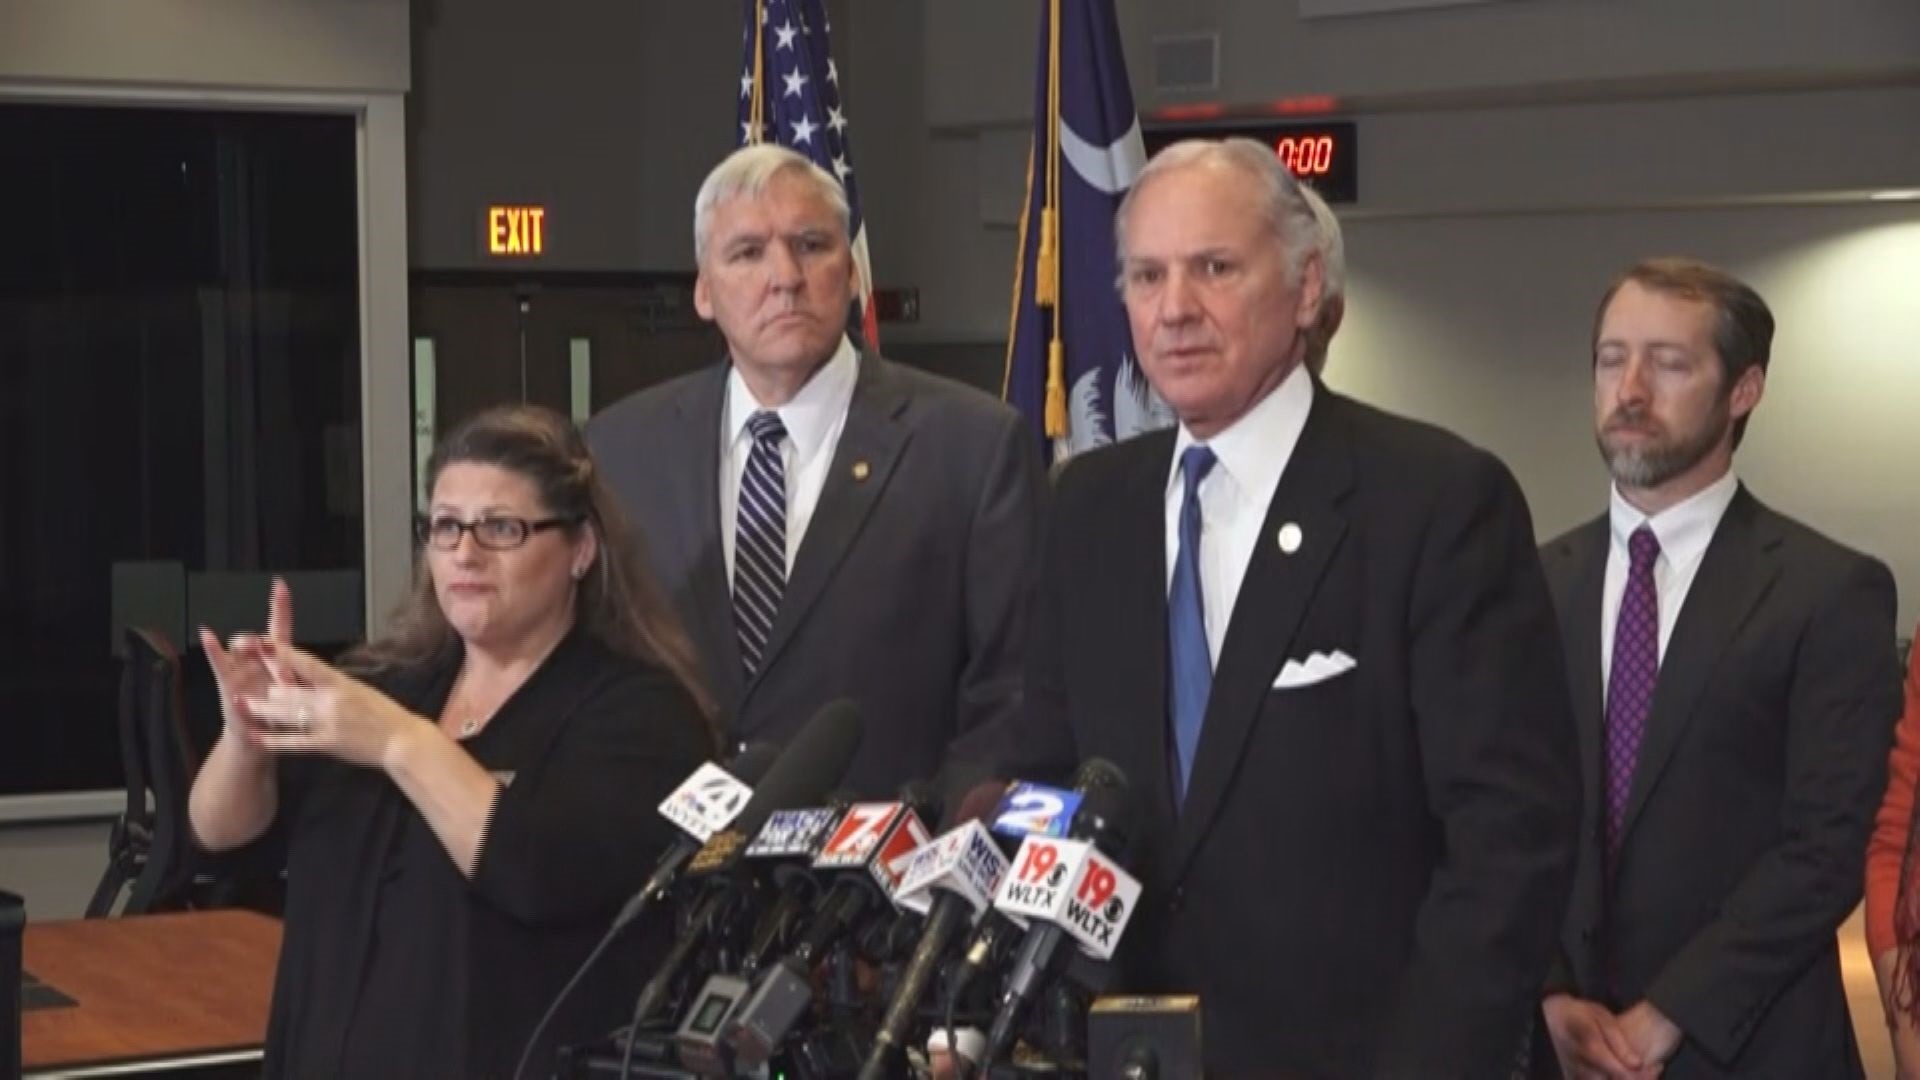 South Carolina Gov. Henry McMaster spoke with state health leaders about two presumptive positive coronavirus cases.